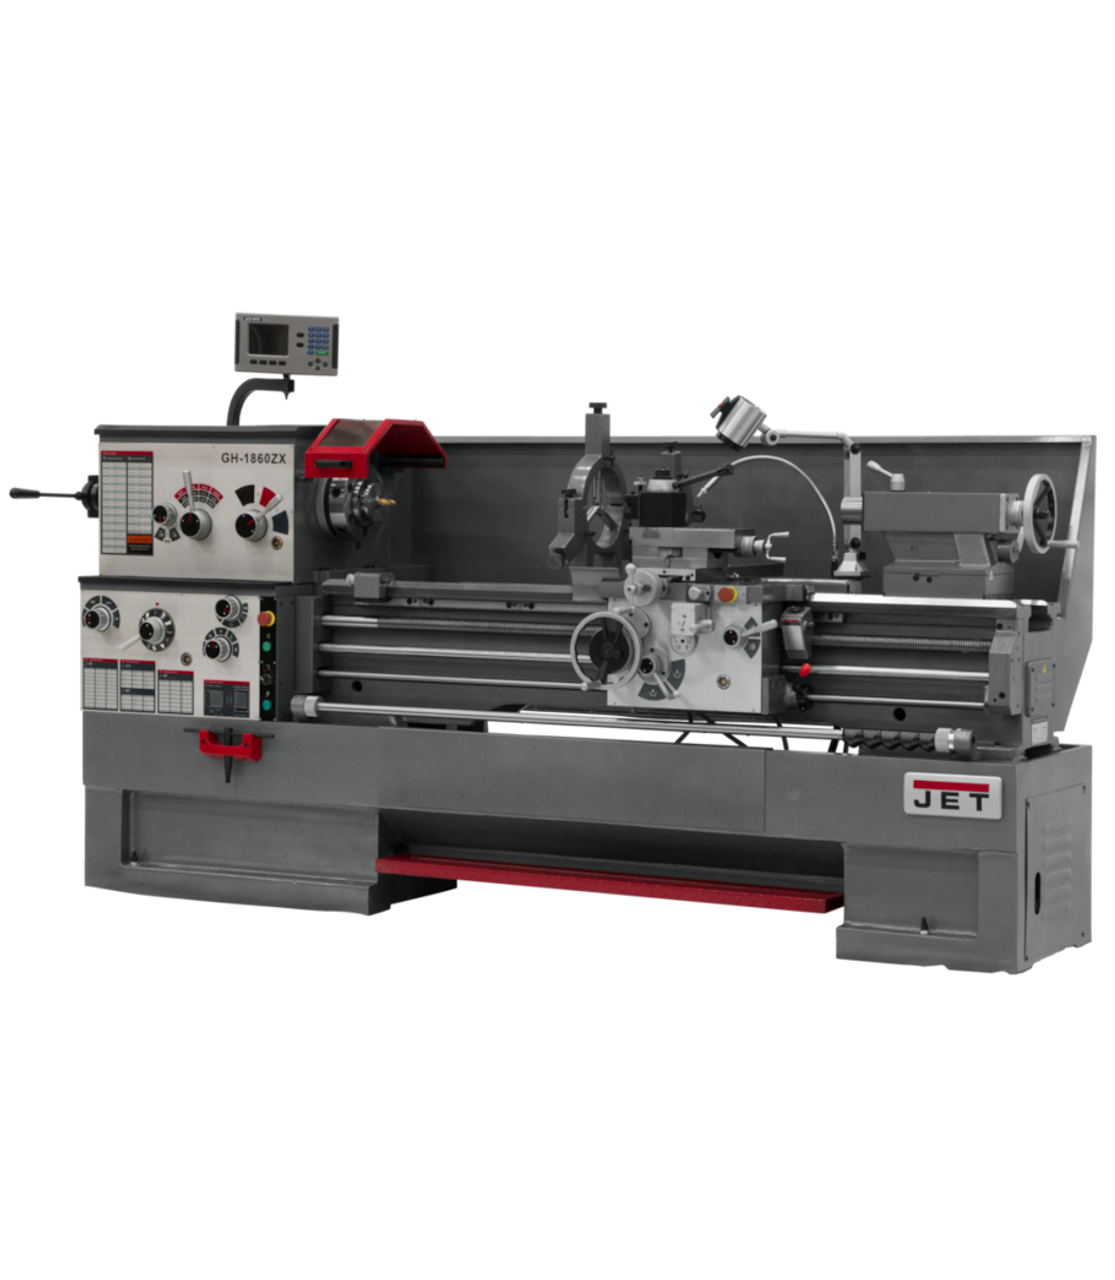 JET GH-1860ZX Large Spindle Bore Lathe with Newall DP700 DRO with Taper Attachment and Collet Closer 460V